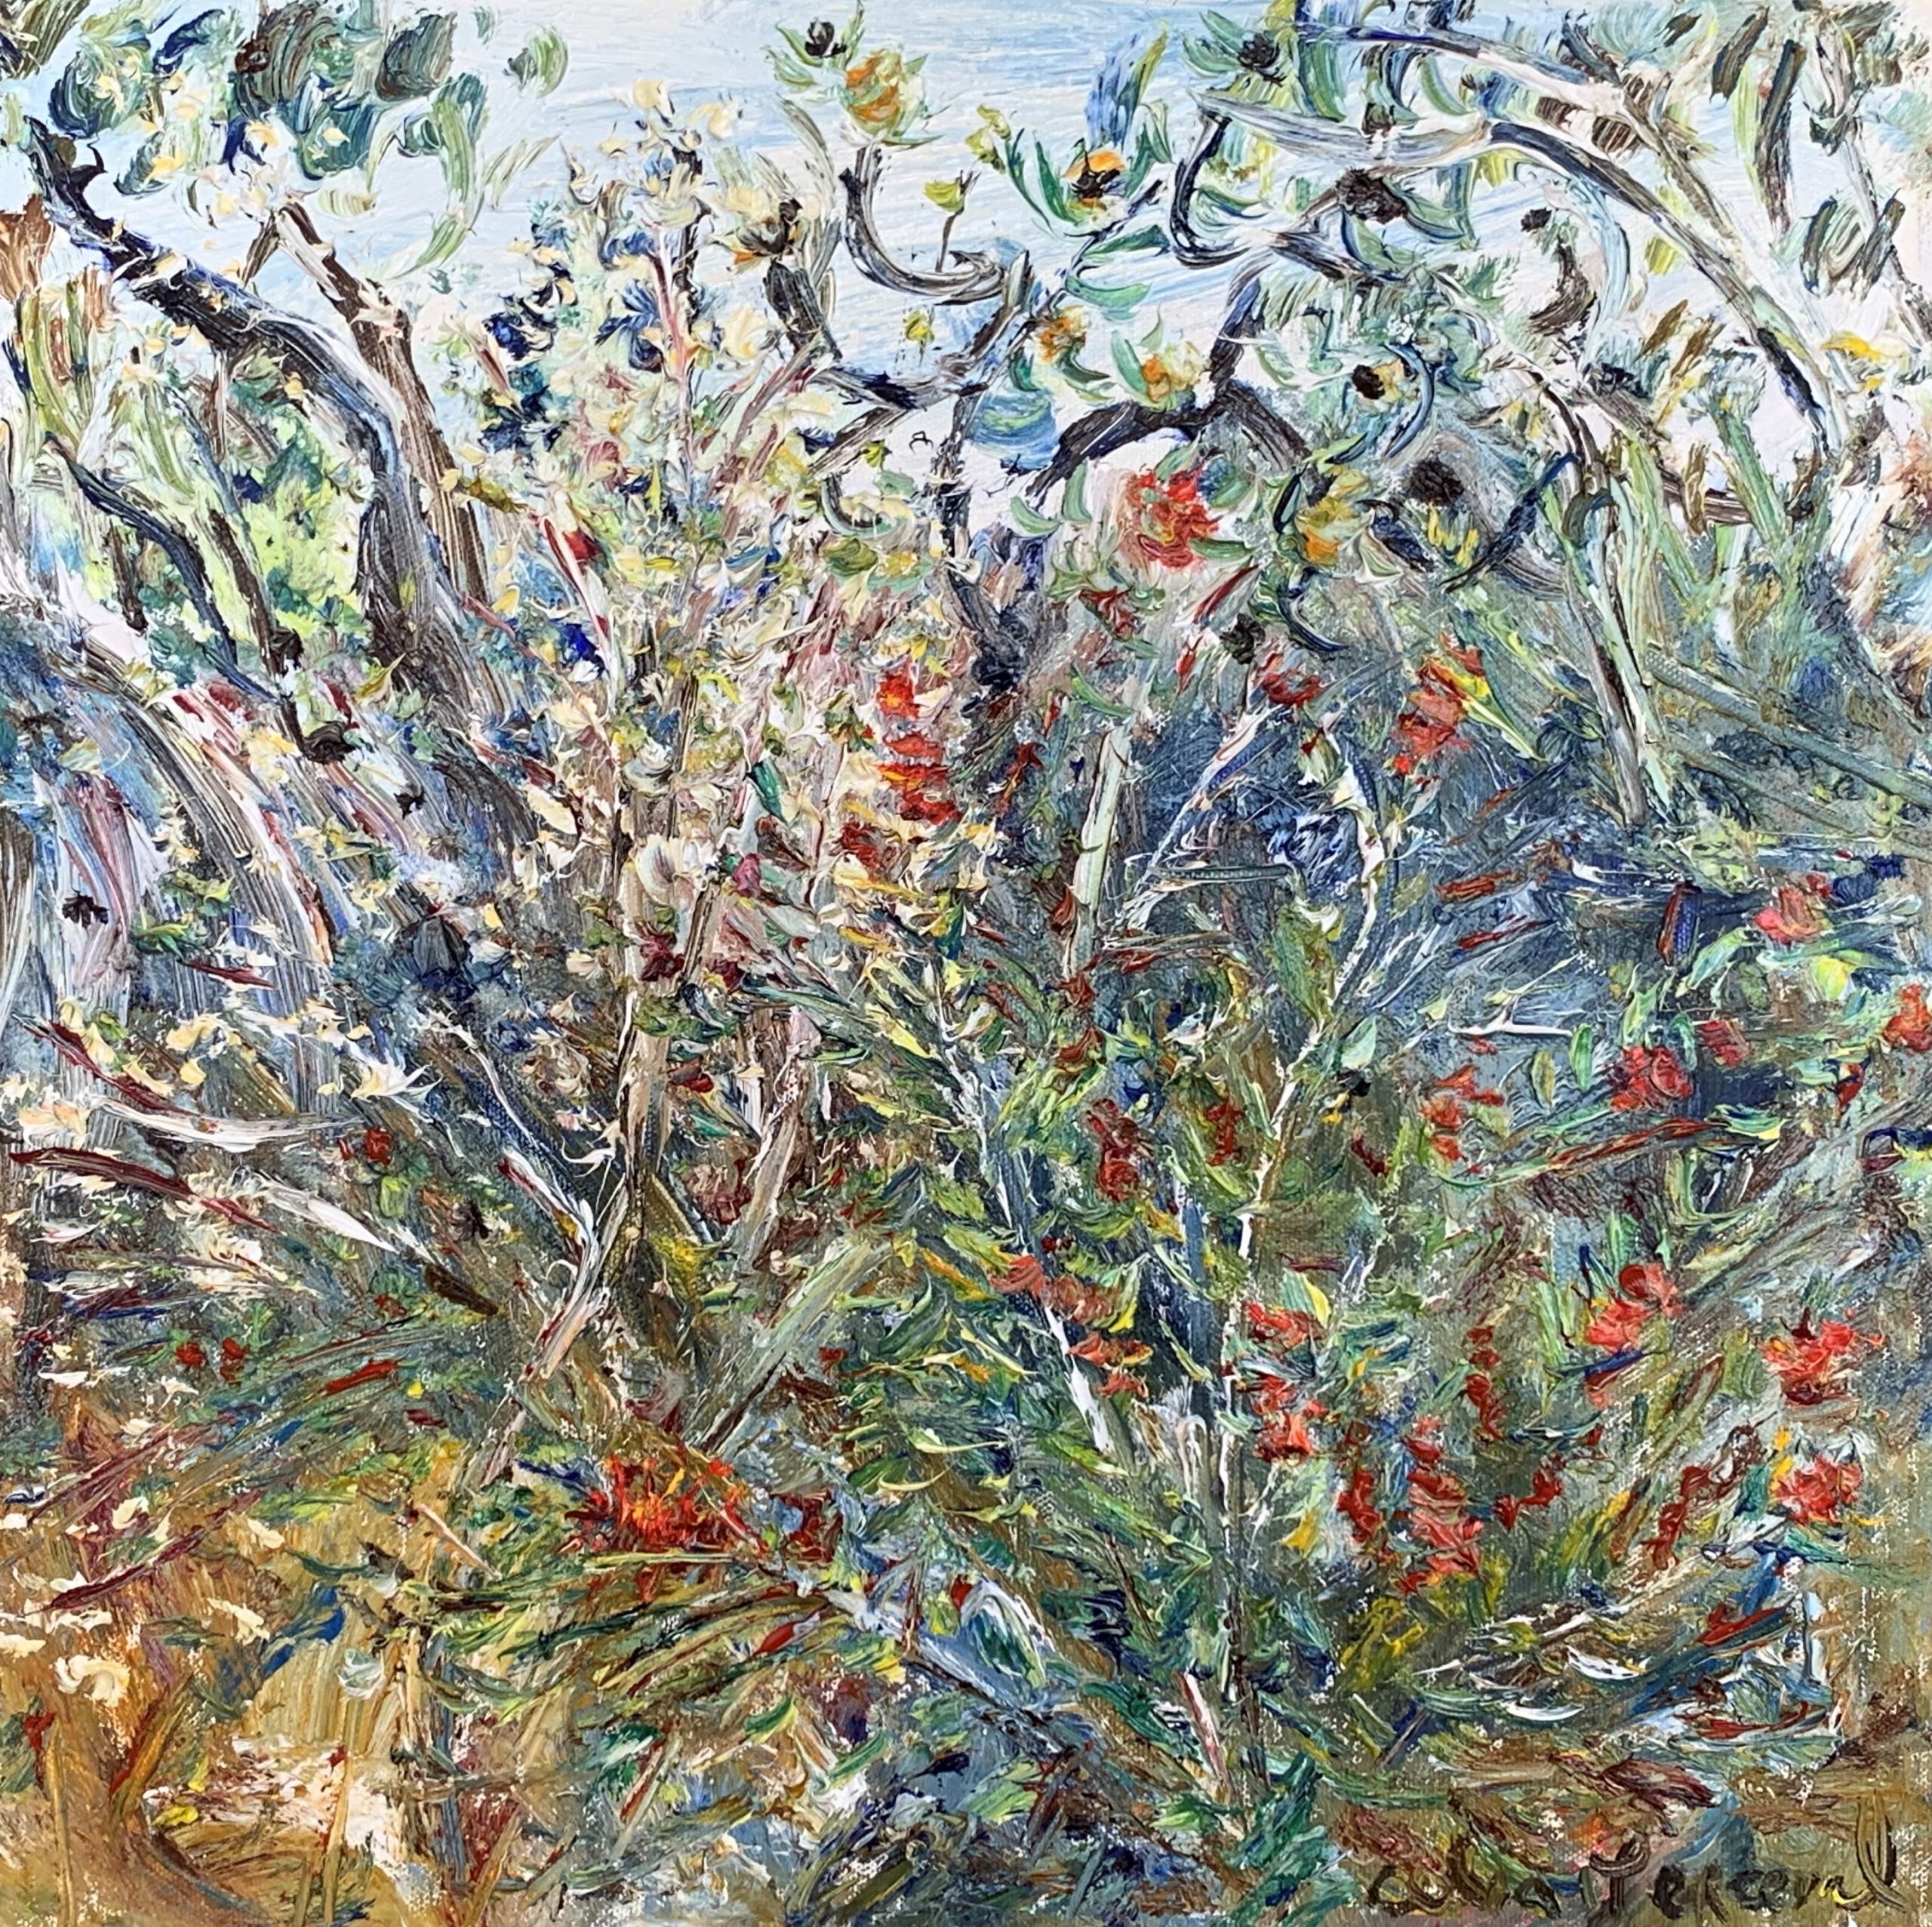 Perceval_Bottlebrush and Banksia in the Wildflowers NSW Coastal Bushland_oil on canvas_master_0